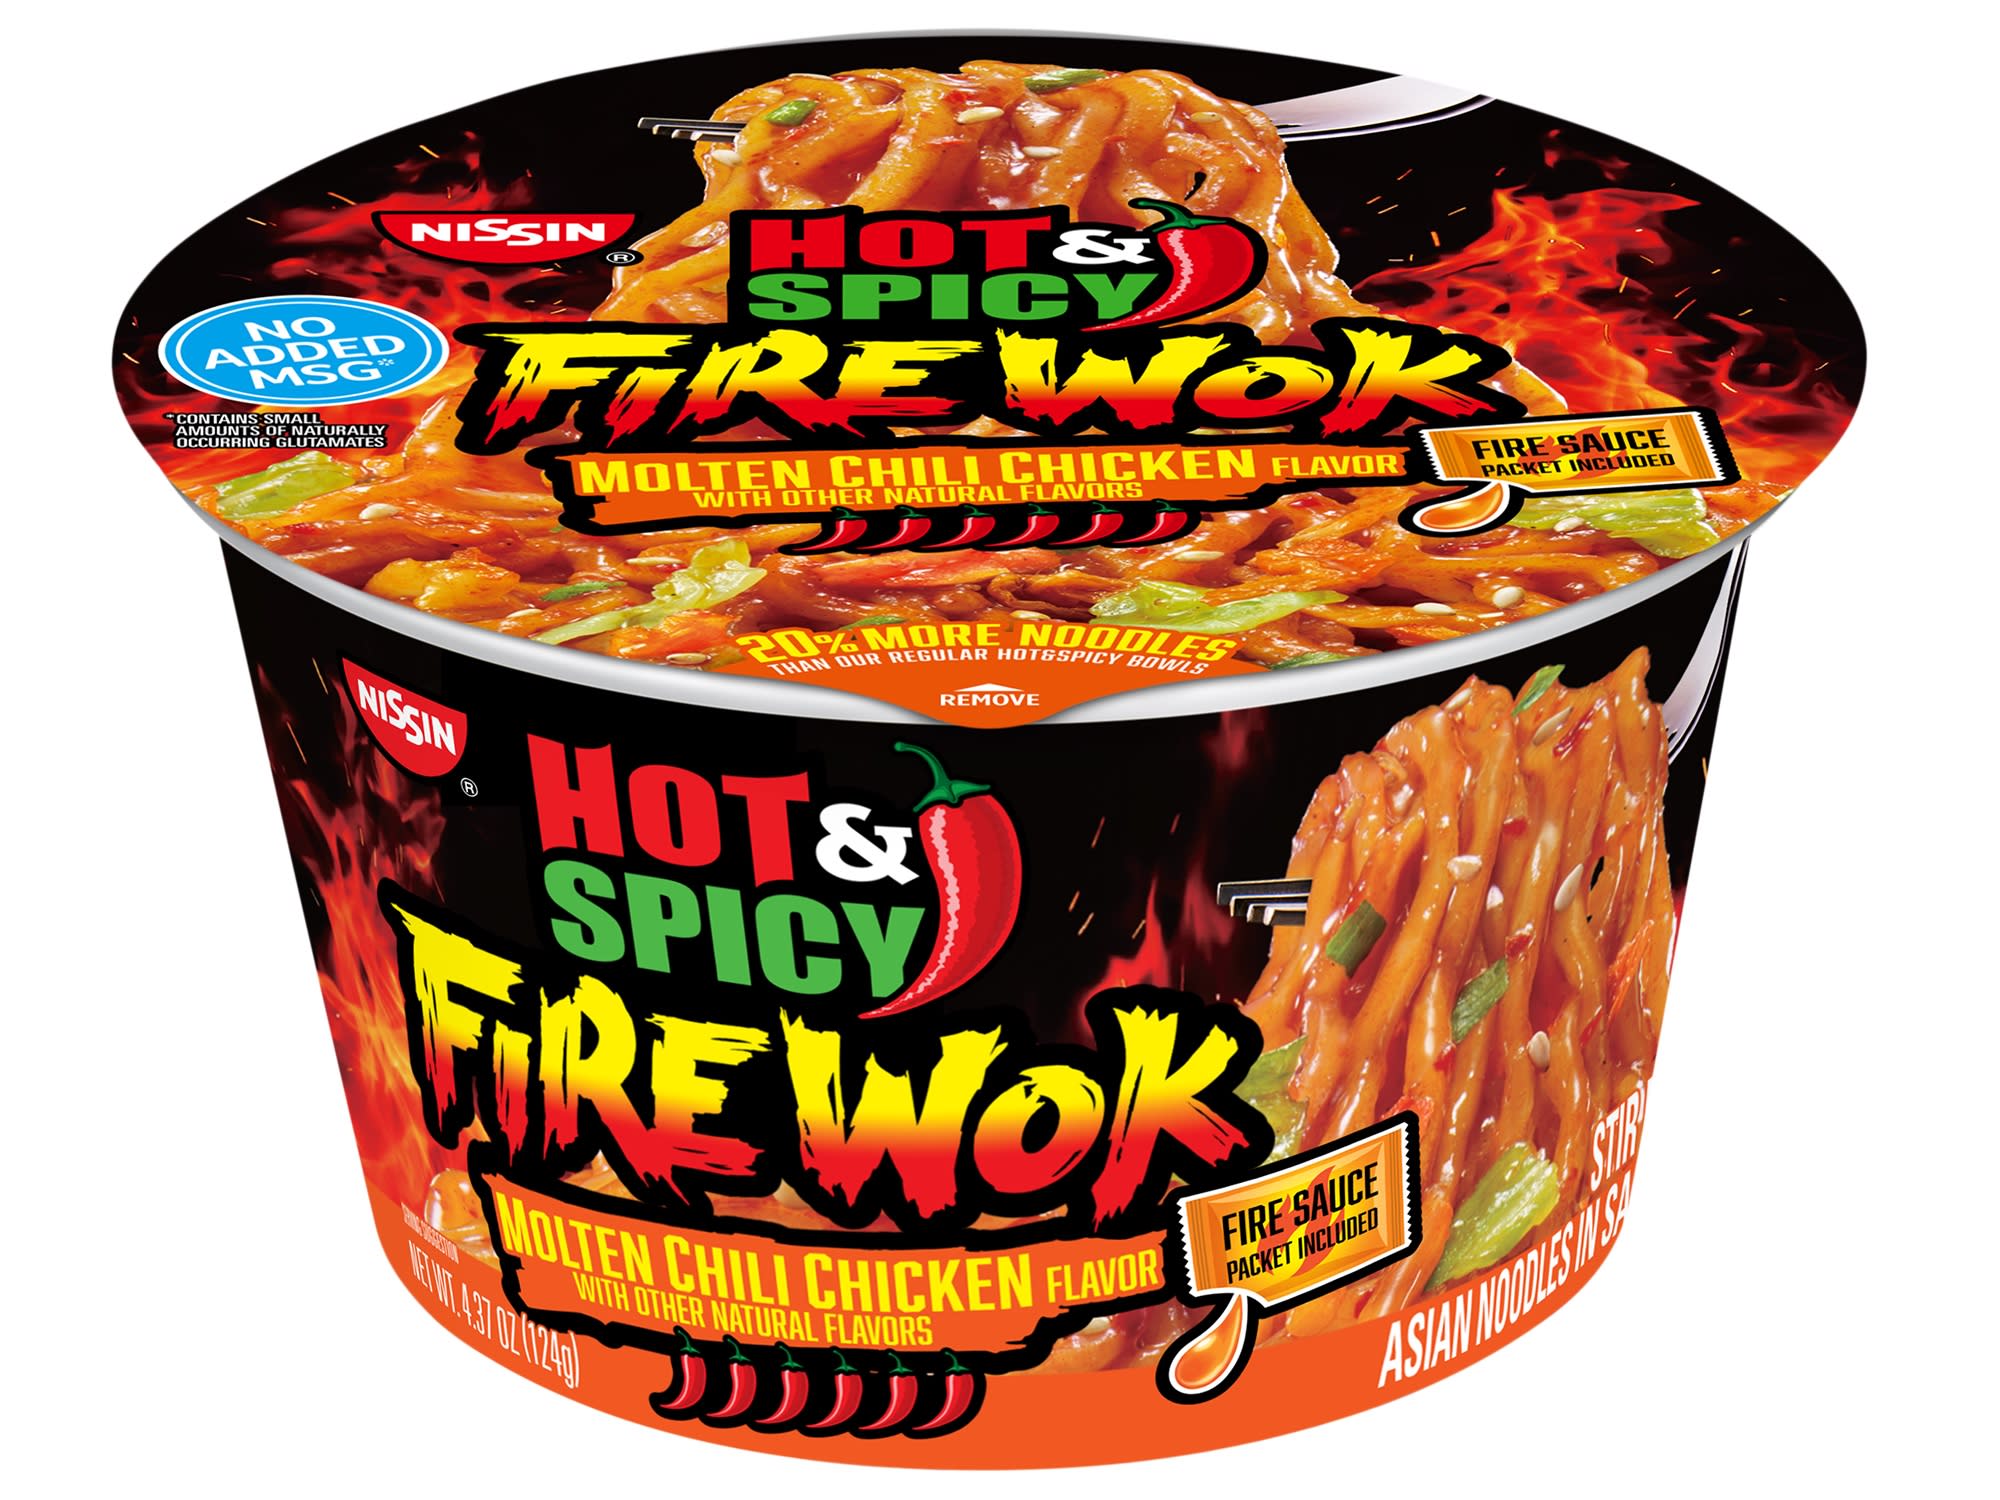 Nissin Hot & Spicy Fire Wok Noodles are not for the flavor timid.